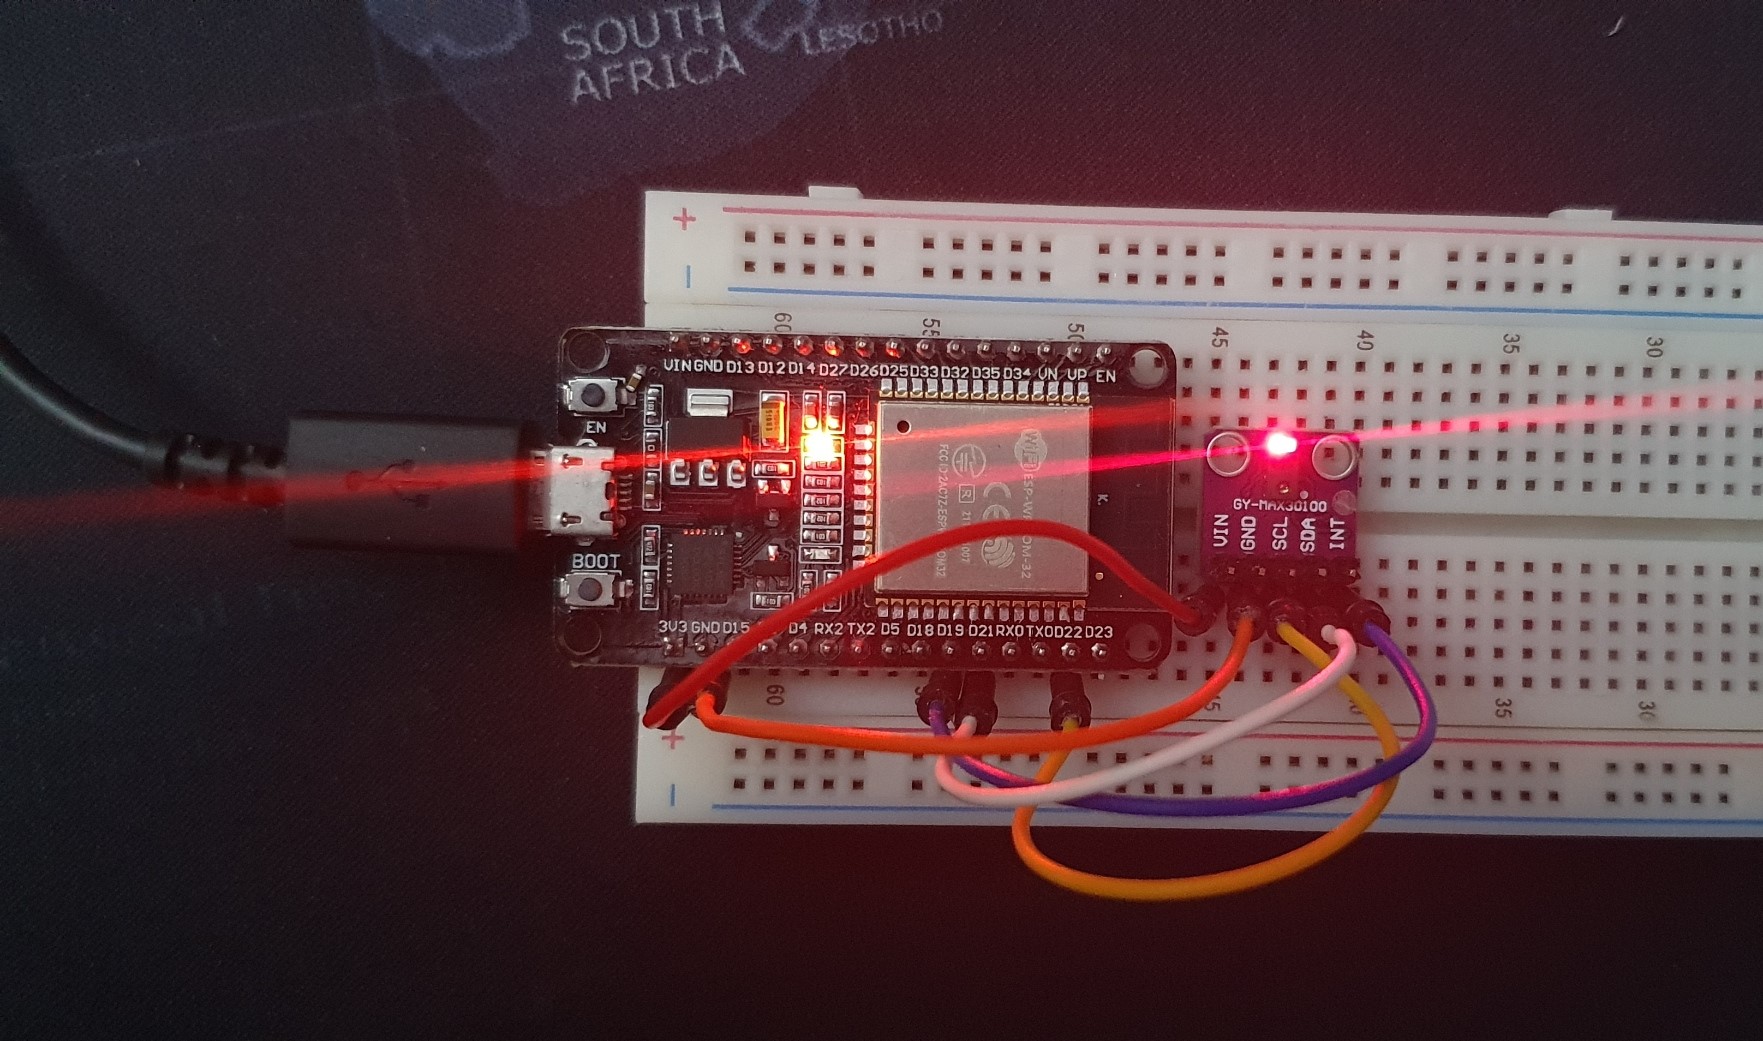  Breadboard implementation of the project